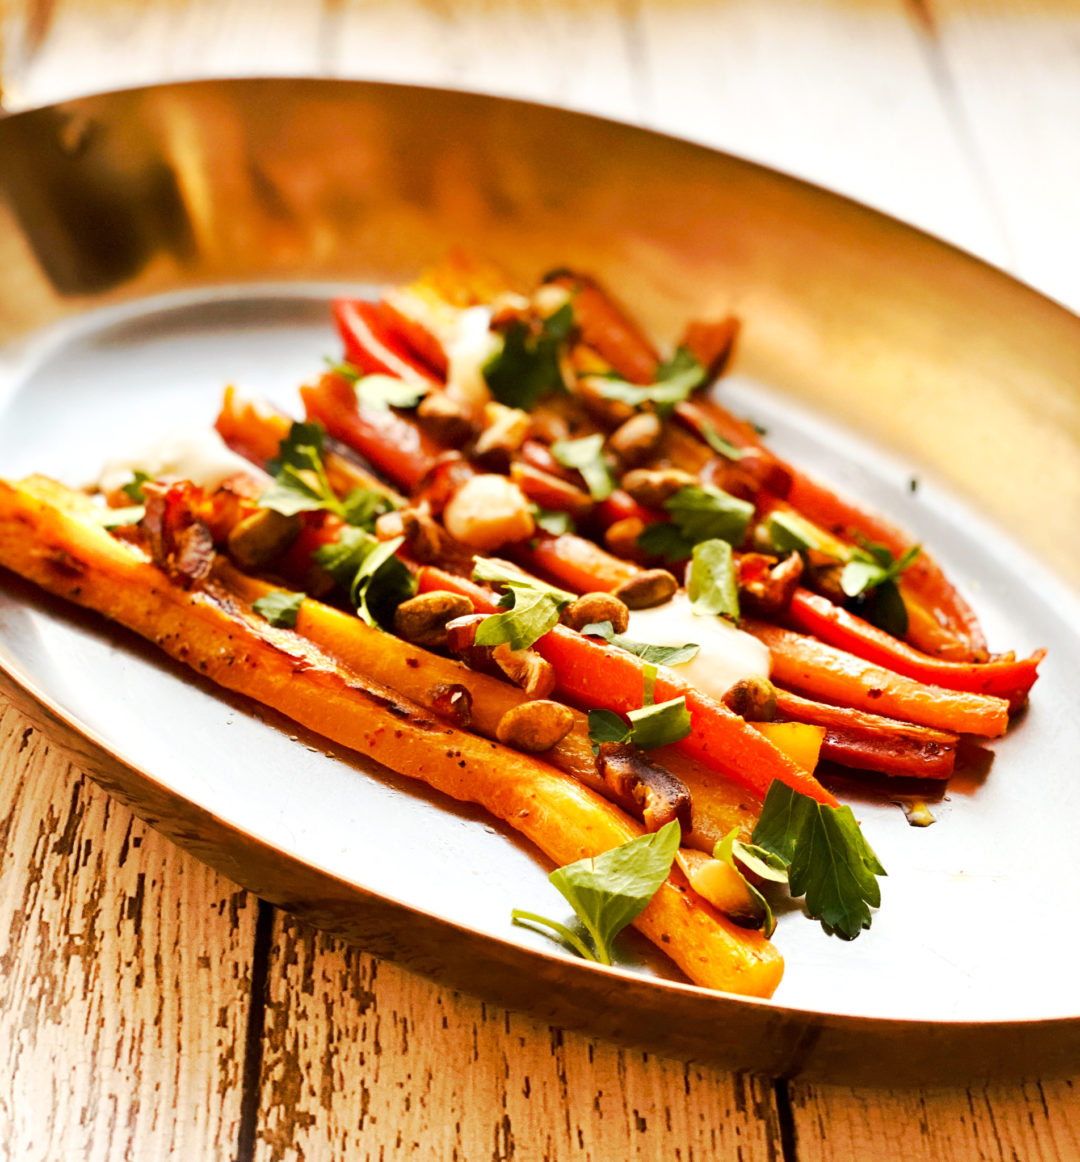 carrots on platter with fresh herbs